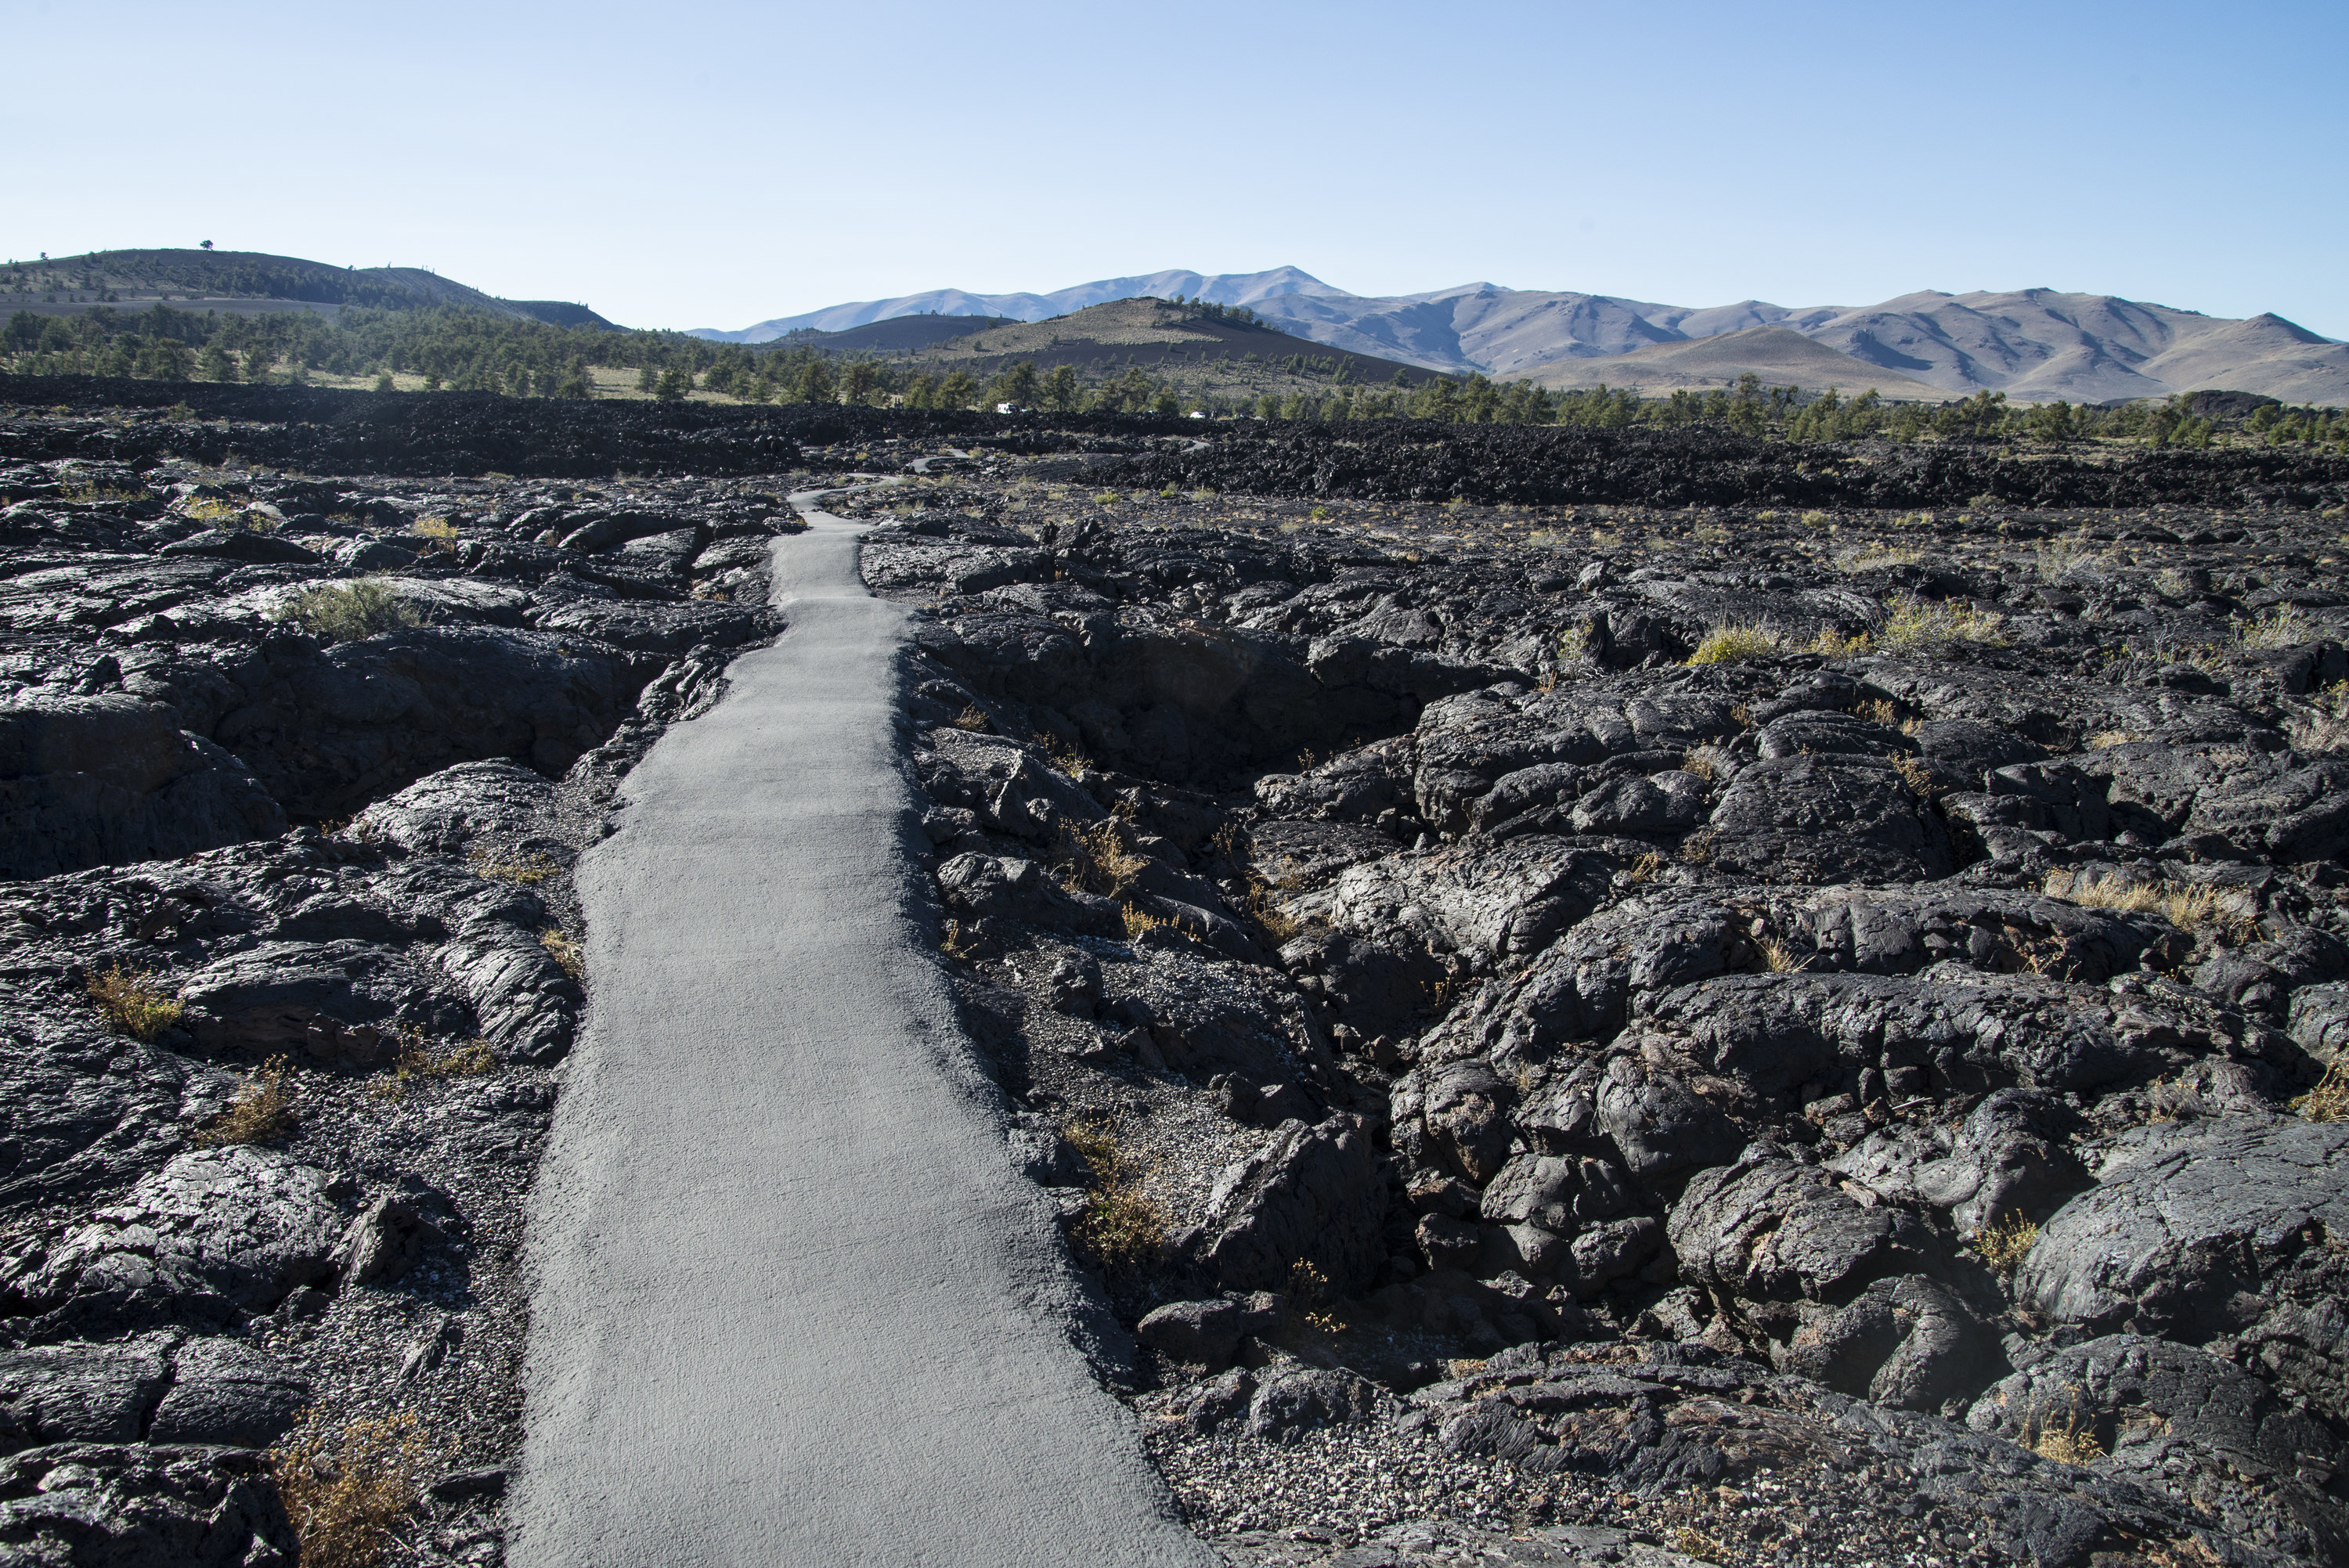 Artificial walkway cuts through lumpy, dark lava formations of the Craters of the Moon monument